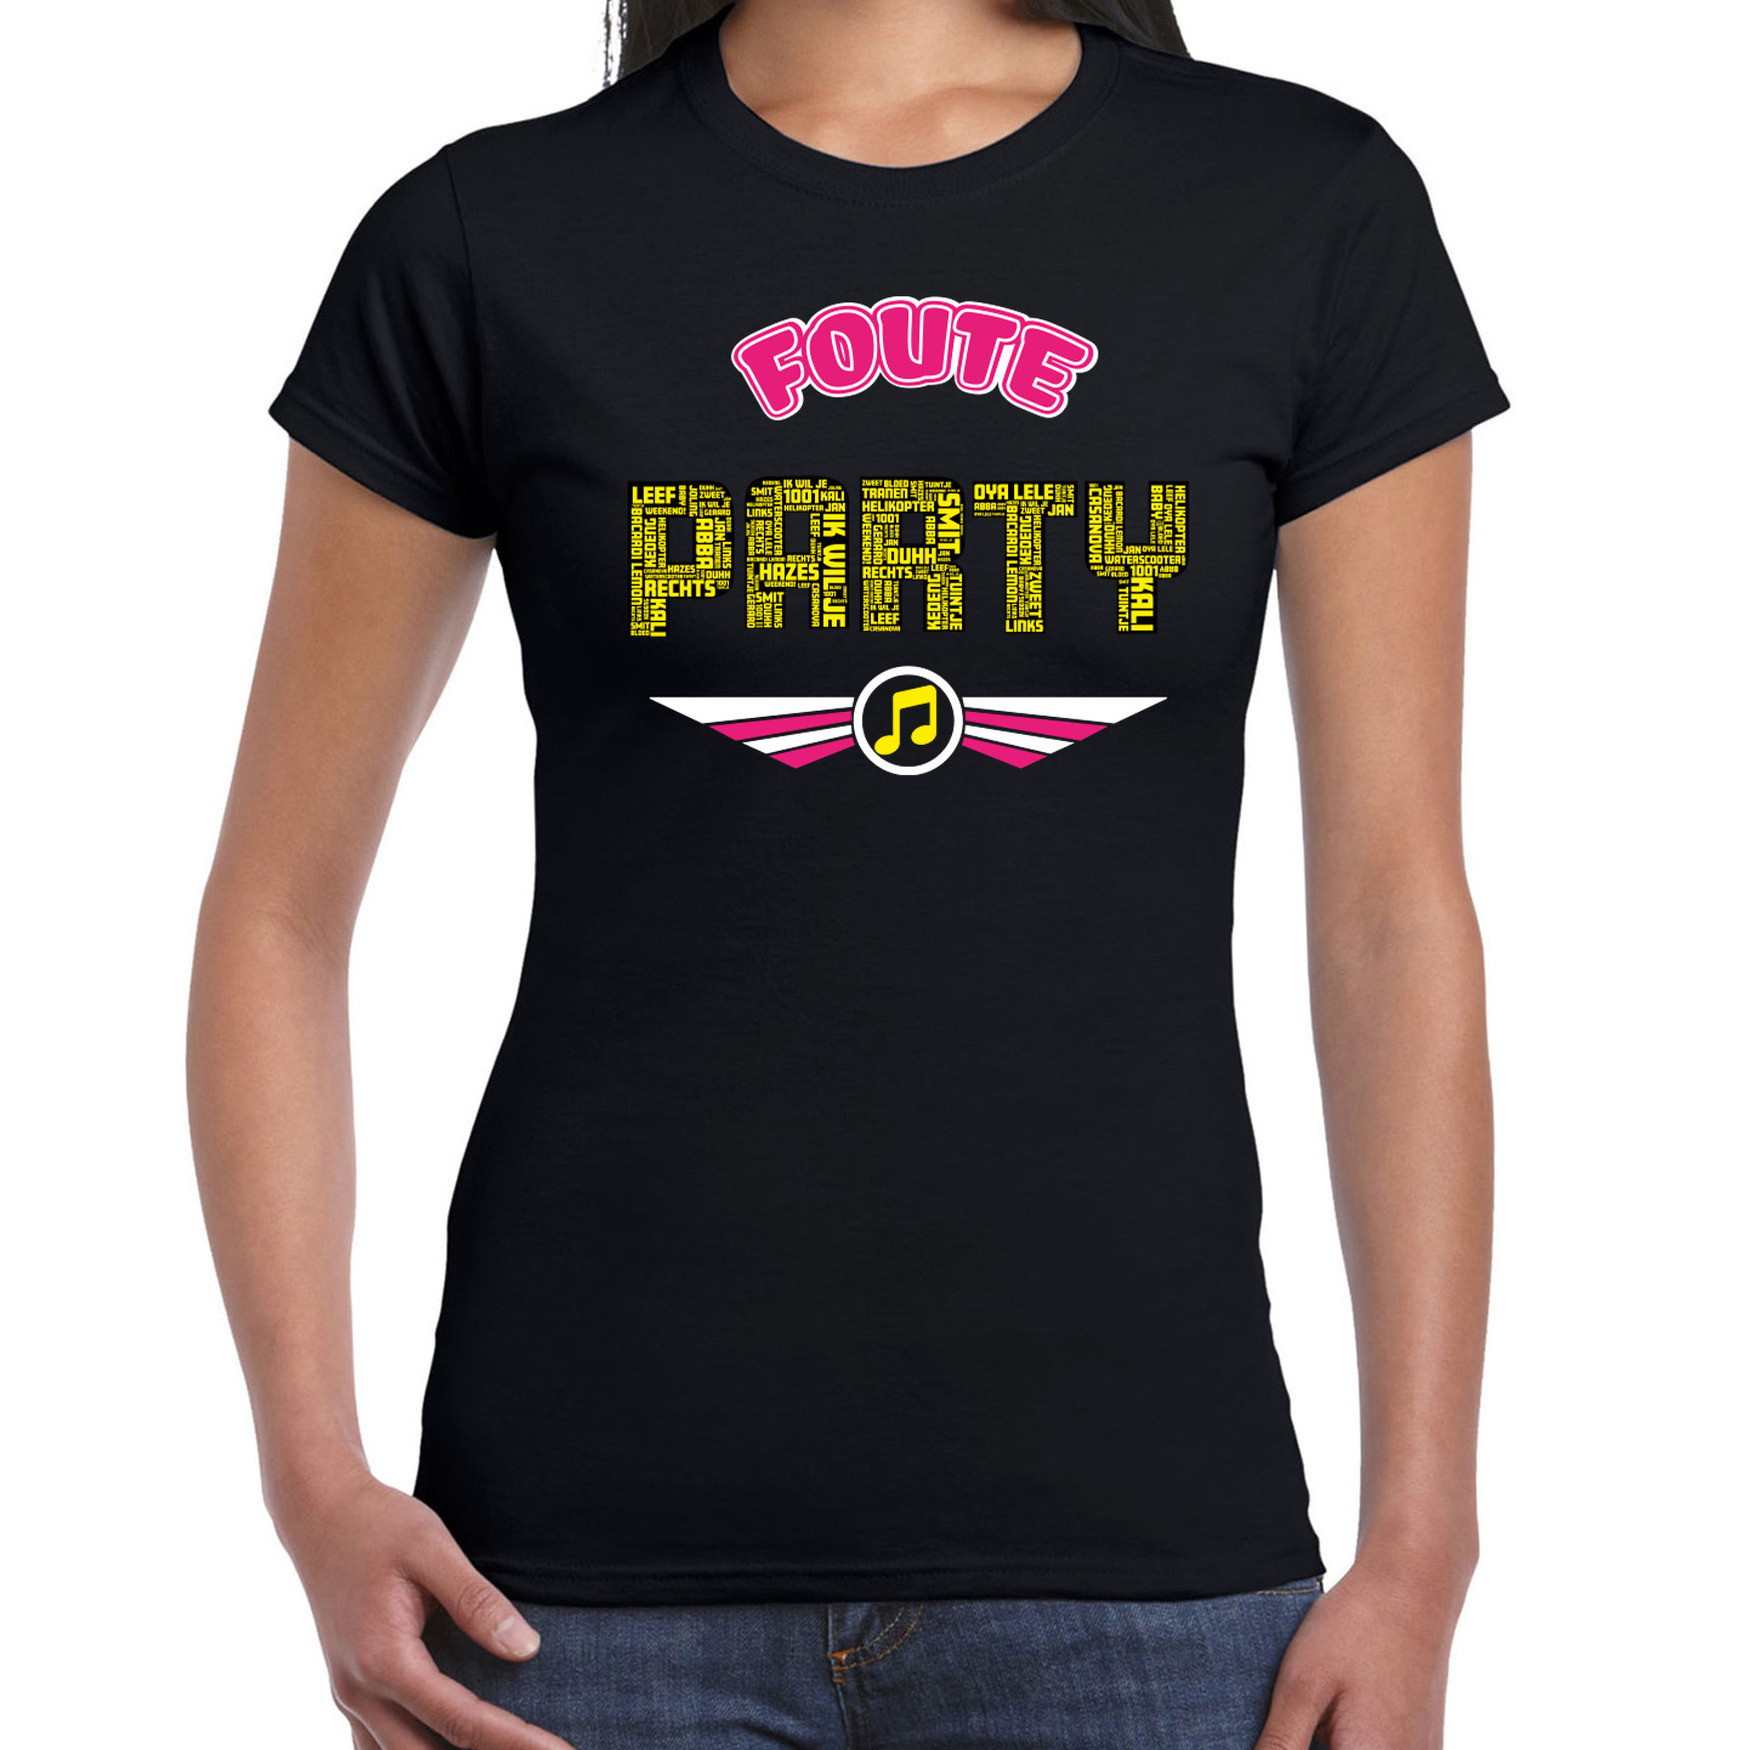 Foute party t-shirt dames zwart foute party outfit-kleding